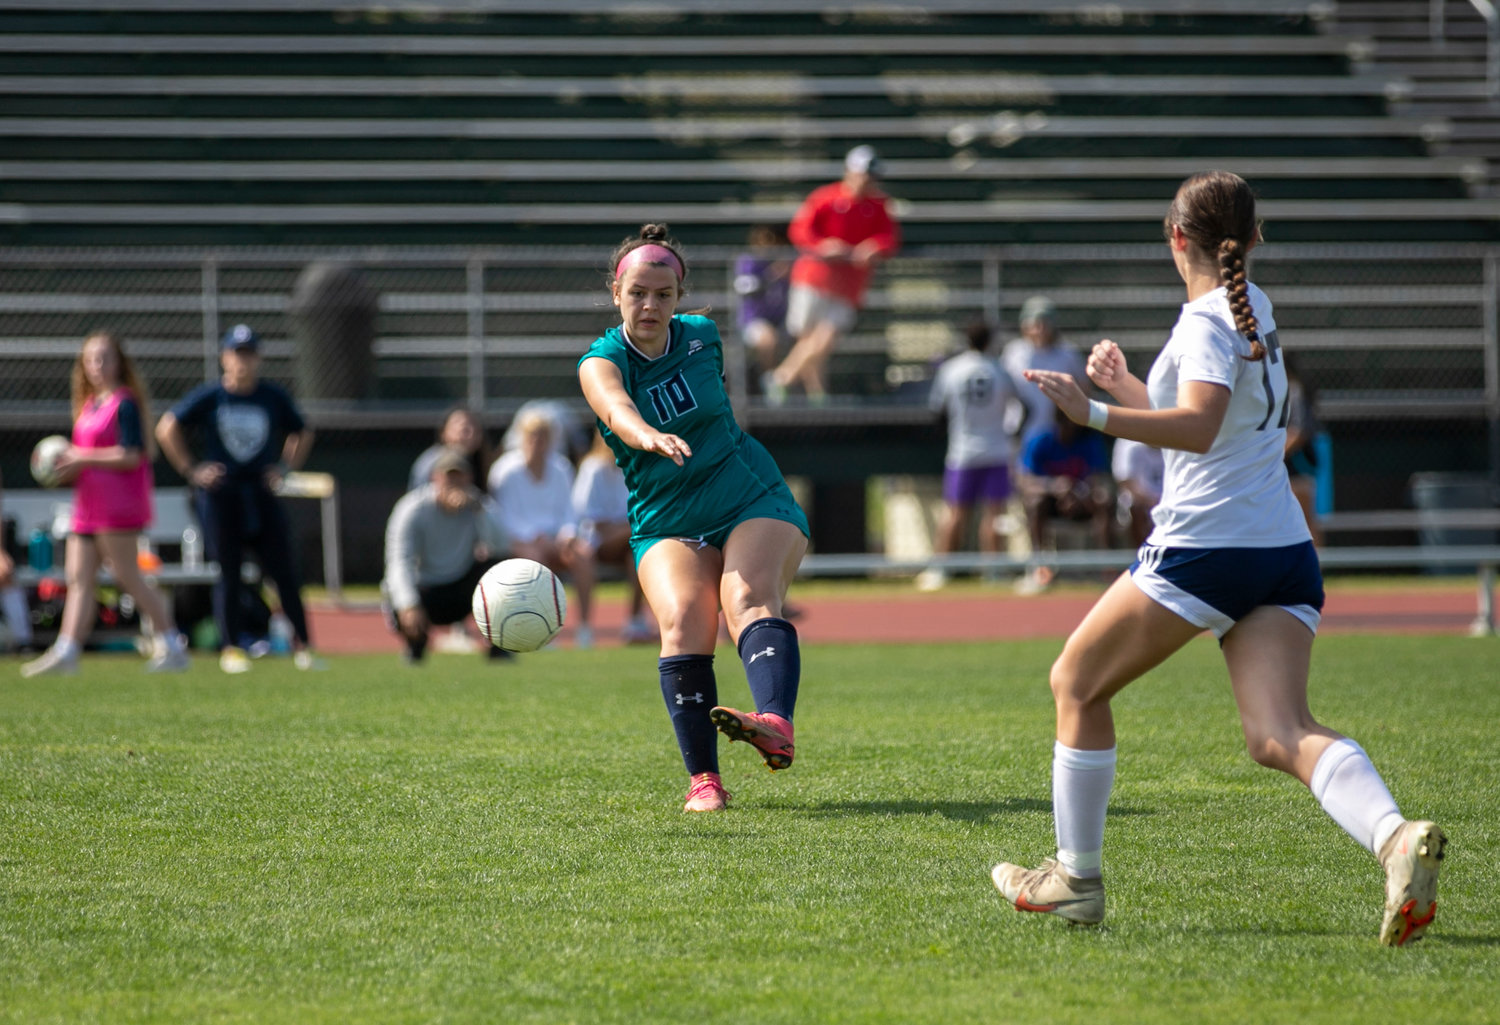 Dolphin senior Jensen Ward sends a ball into the offensive end during Saturday’s gold final match against the Baker Hornets at the Gulf Shores Sportsplex as part of the annual Island Cup. The Belhaven commit helped the Dolphins earn shutout wins over Austin and Moody in Friday’s action.